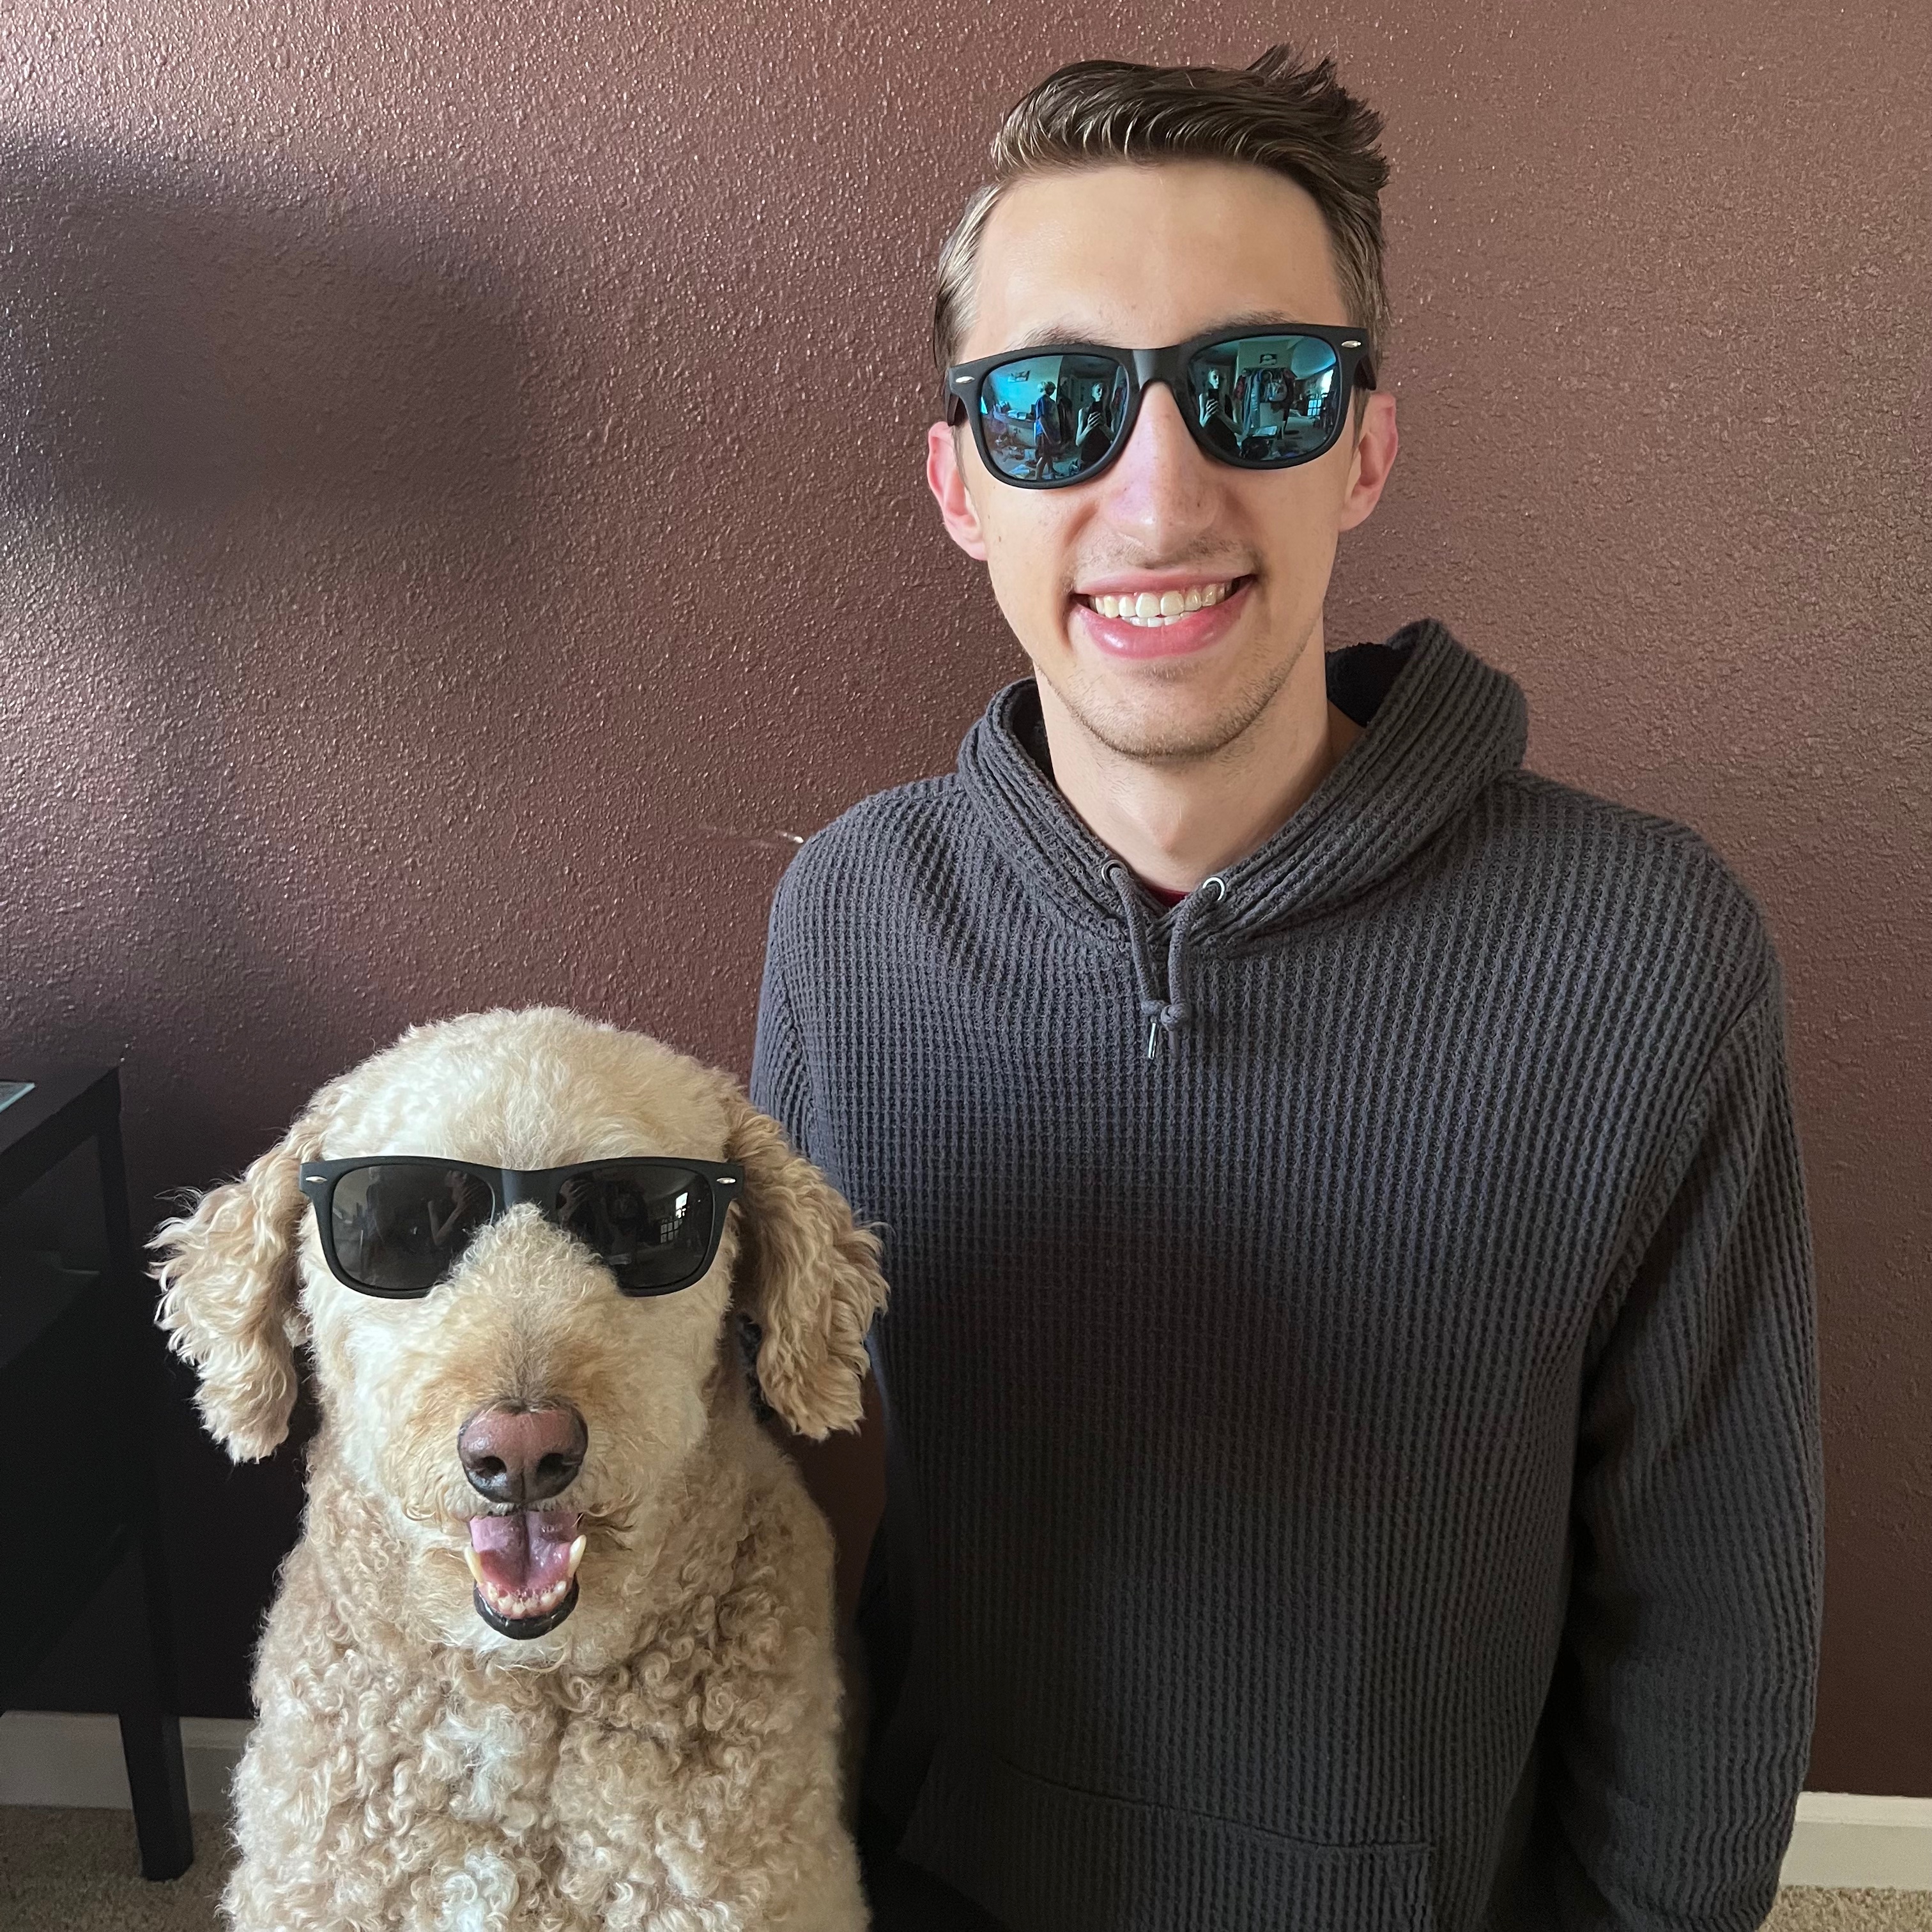 Real-life photo of my and my dog wearing sunglasses